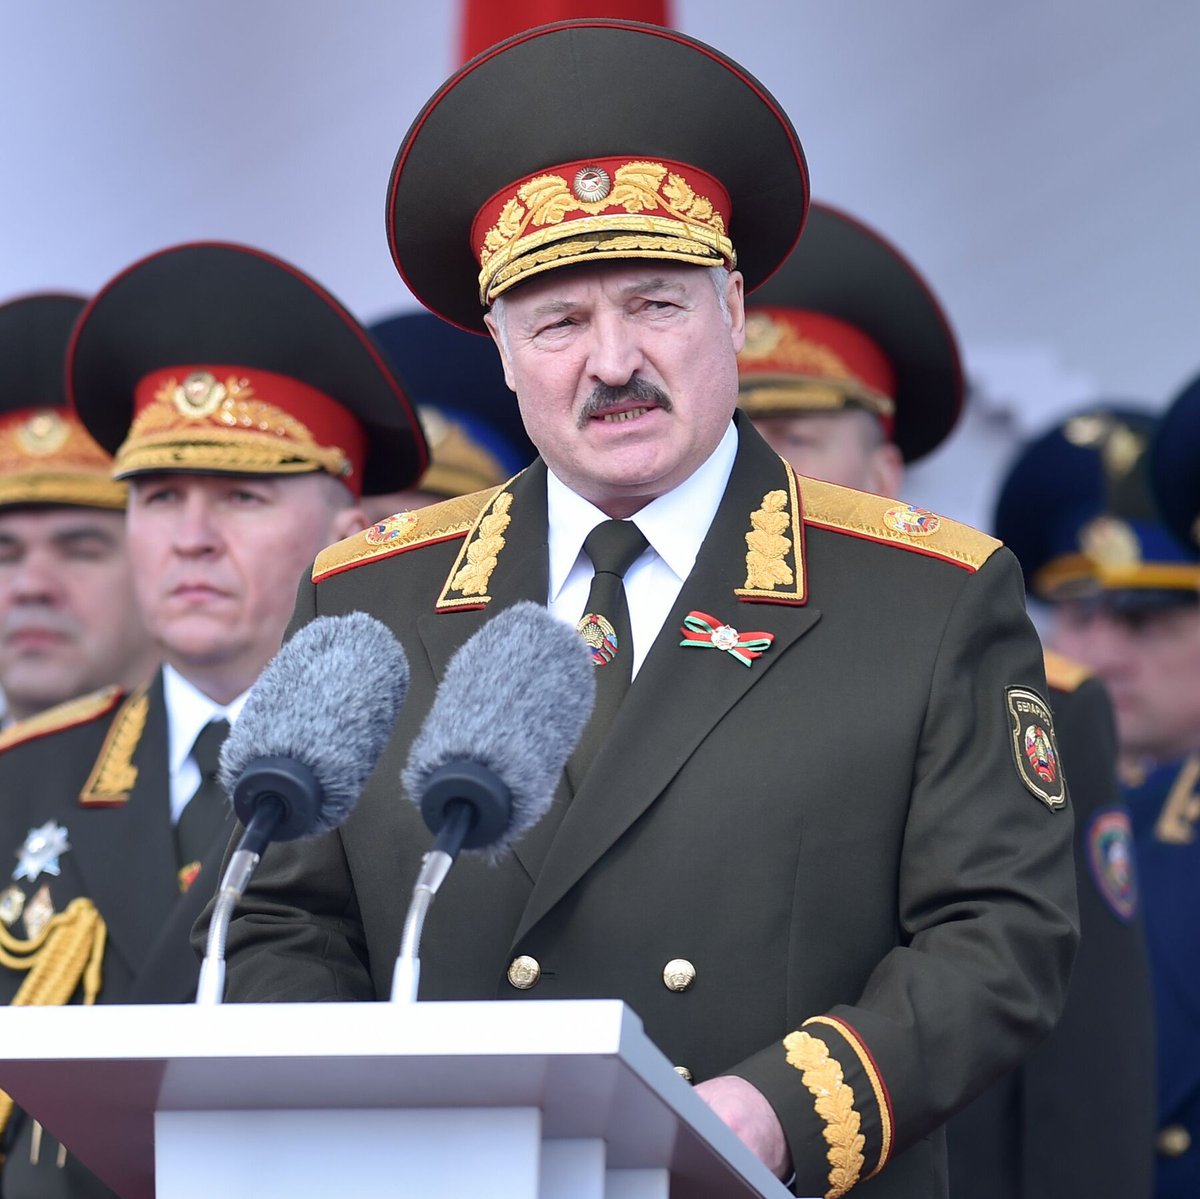 Lukashenko: 'One thing is clear: they [West] really want to drag us into a war. While they are provoking us, digging trenches, modernizing military infrastructure and weapons. I have already said: we are building a peaceful life on the other side of the border. We don't build